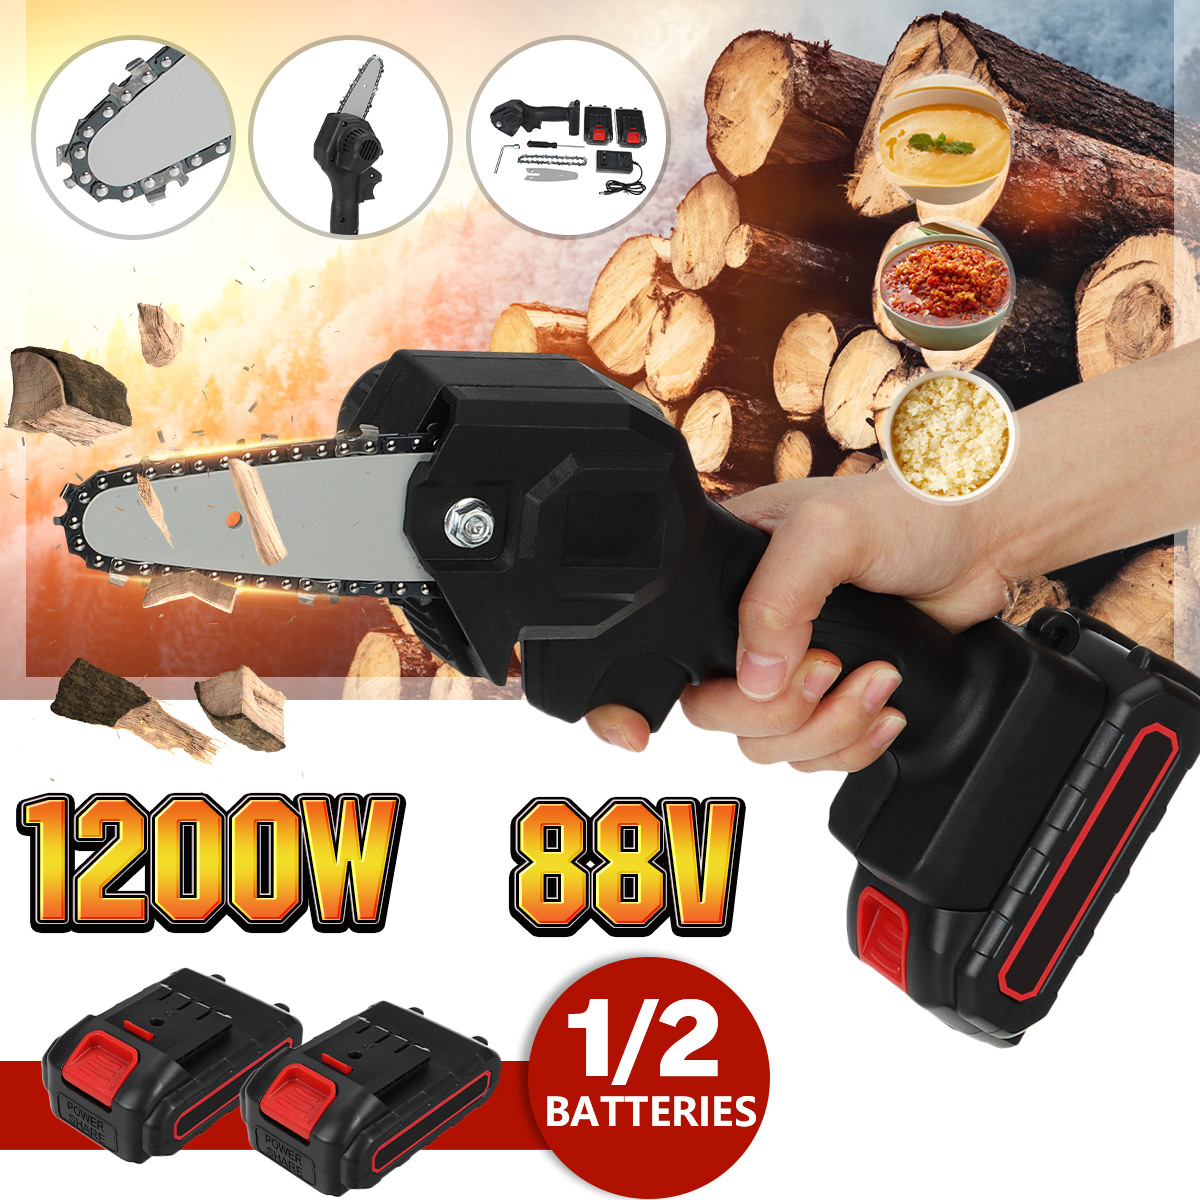 24V-1200W-4Inch-One-Hand-Saw-Electric-Chain-Saw-Woodworking-Wood-Cutter-W-012pcs-Battery-1806769-2